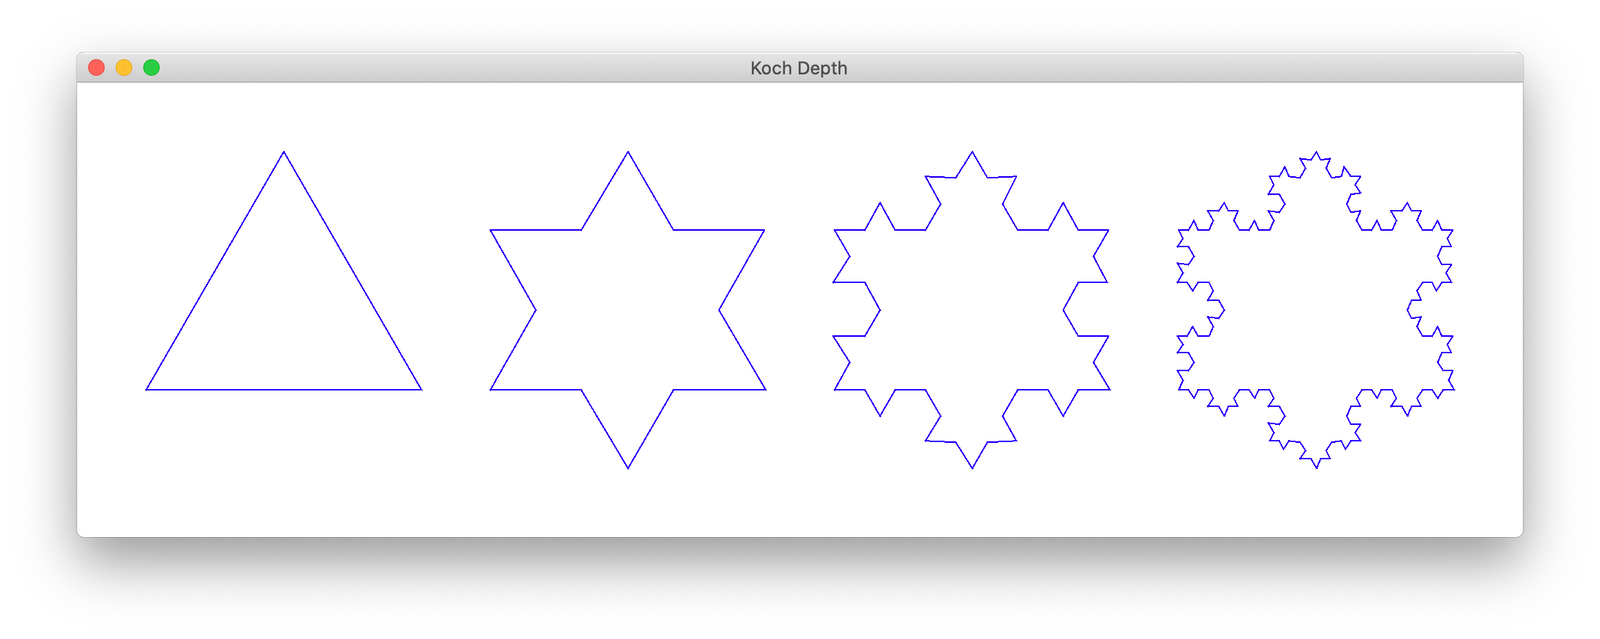 The original figure (left) and first three recursive steps towards generating the Koch curve.